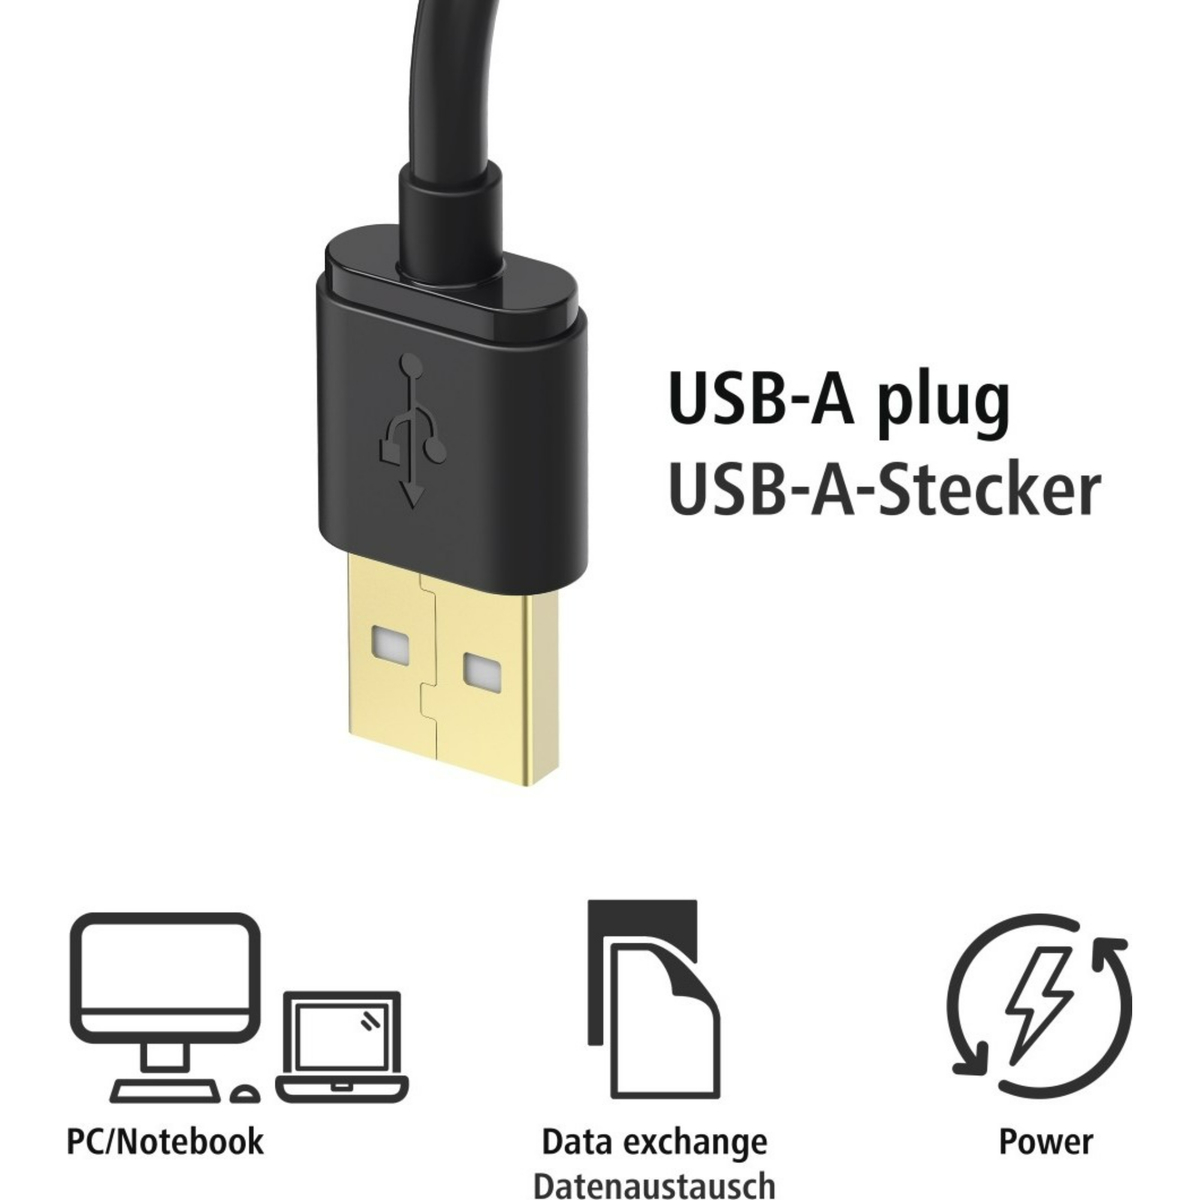 Hama 2-in-1 Micro-USB Cable with USB Type-C Adapter, 1 m, Black, 178327